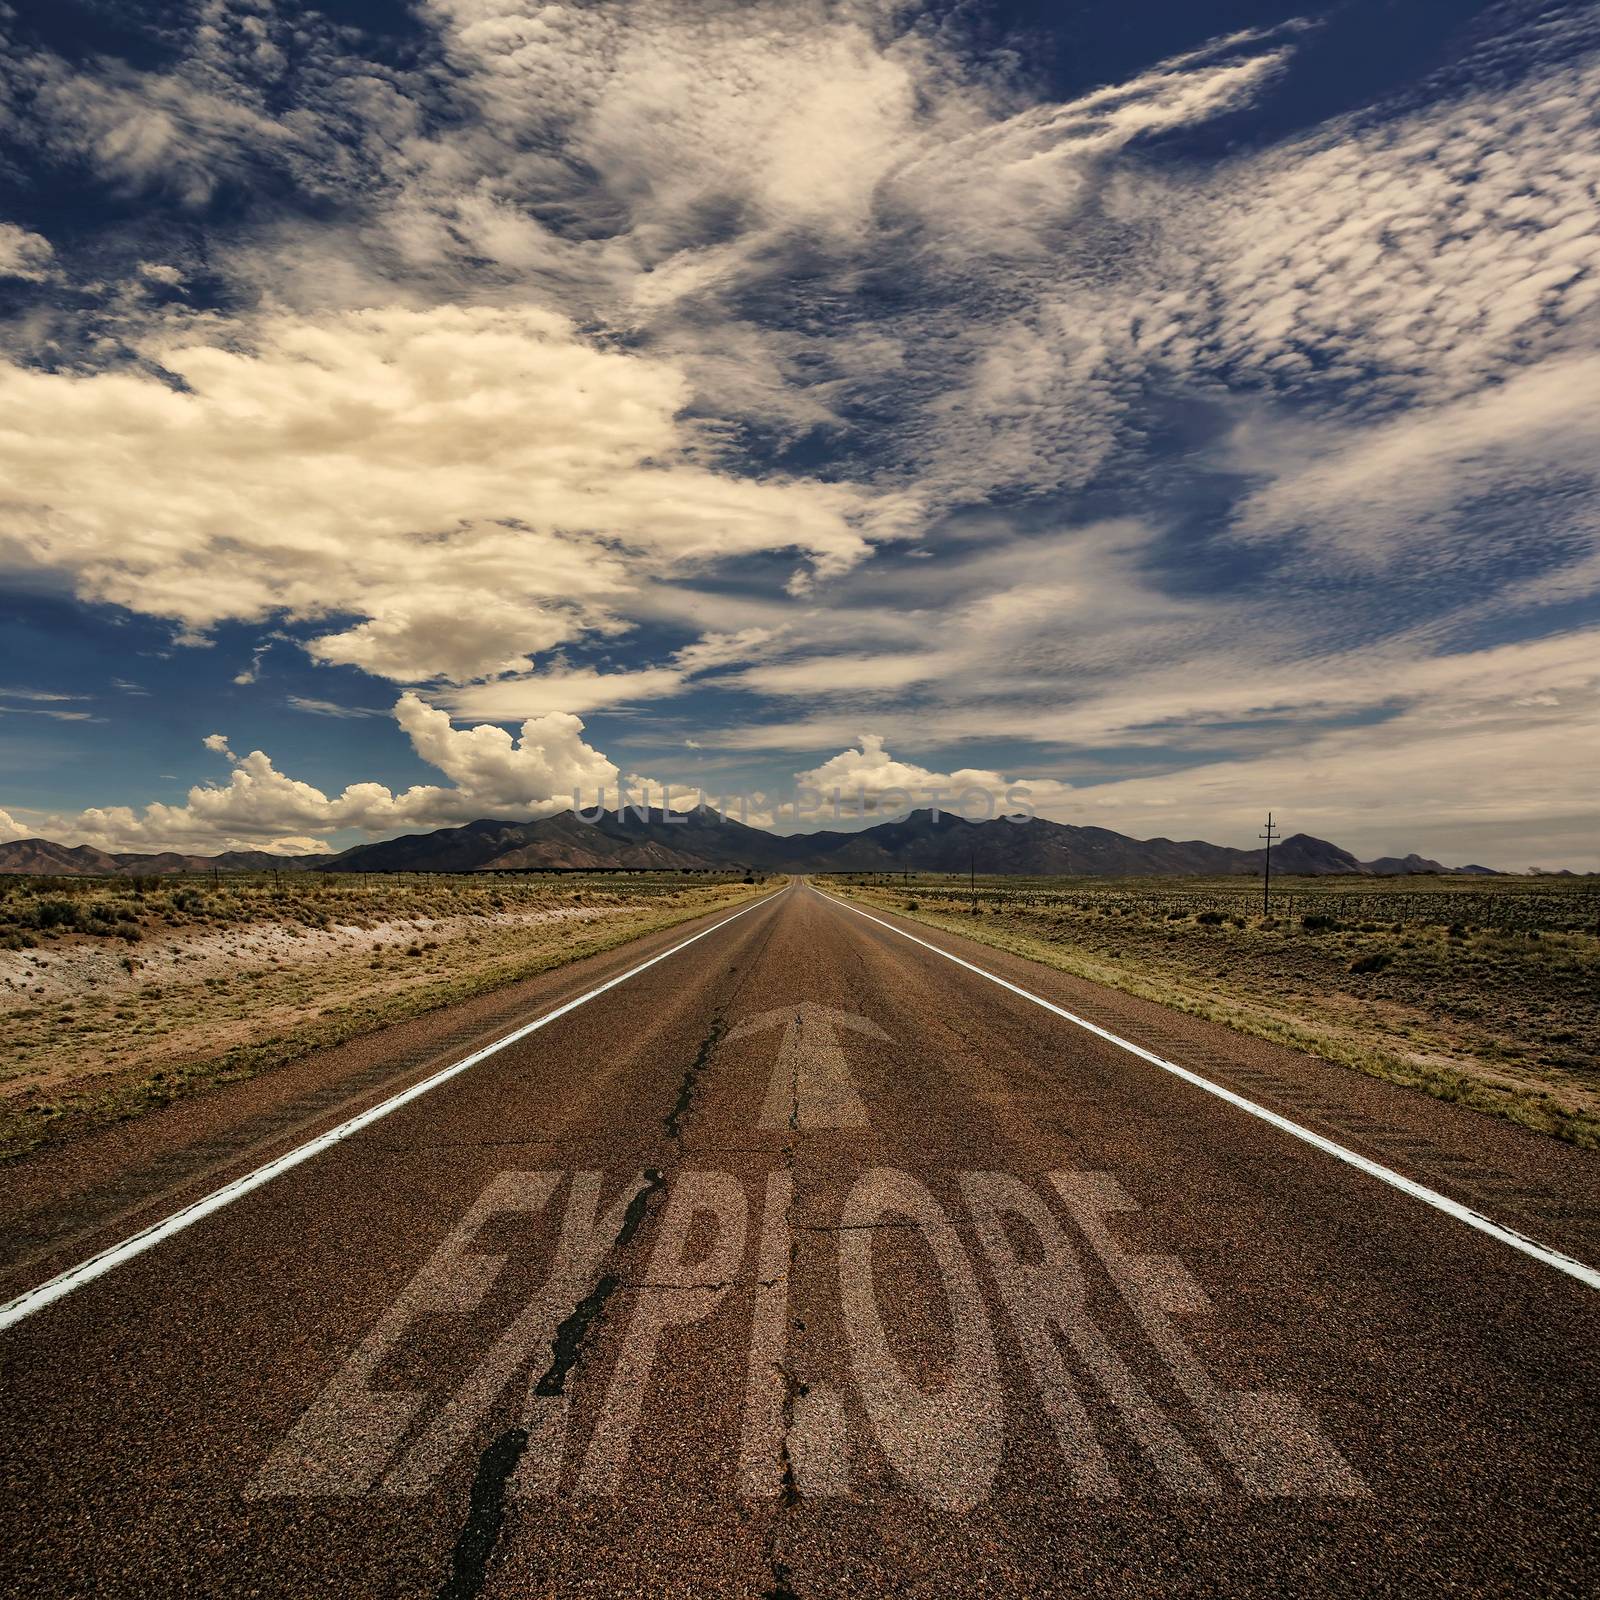 Conceptual image of desert road with the word explore and arrow